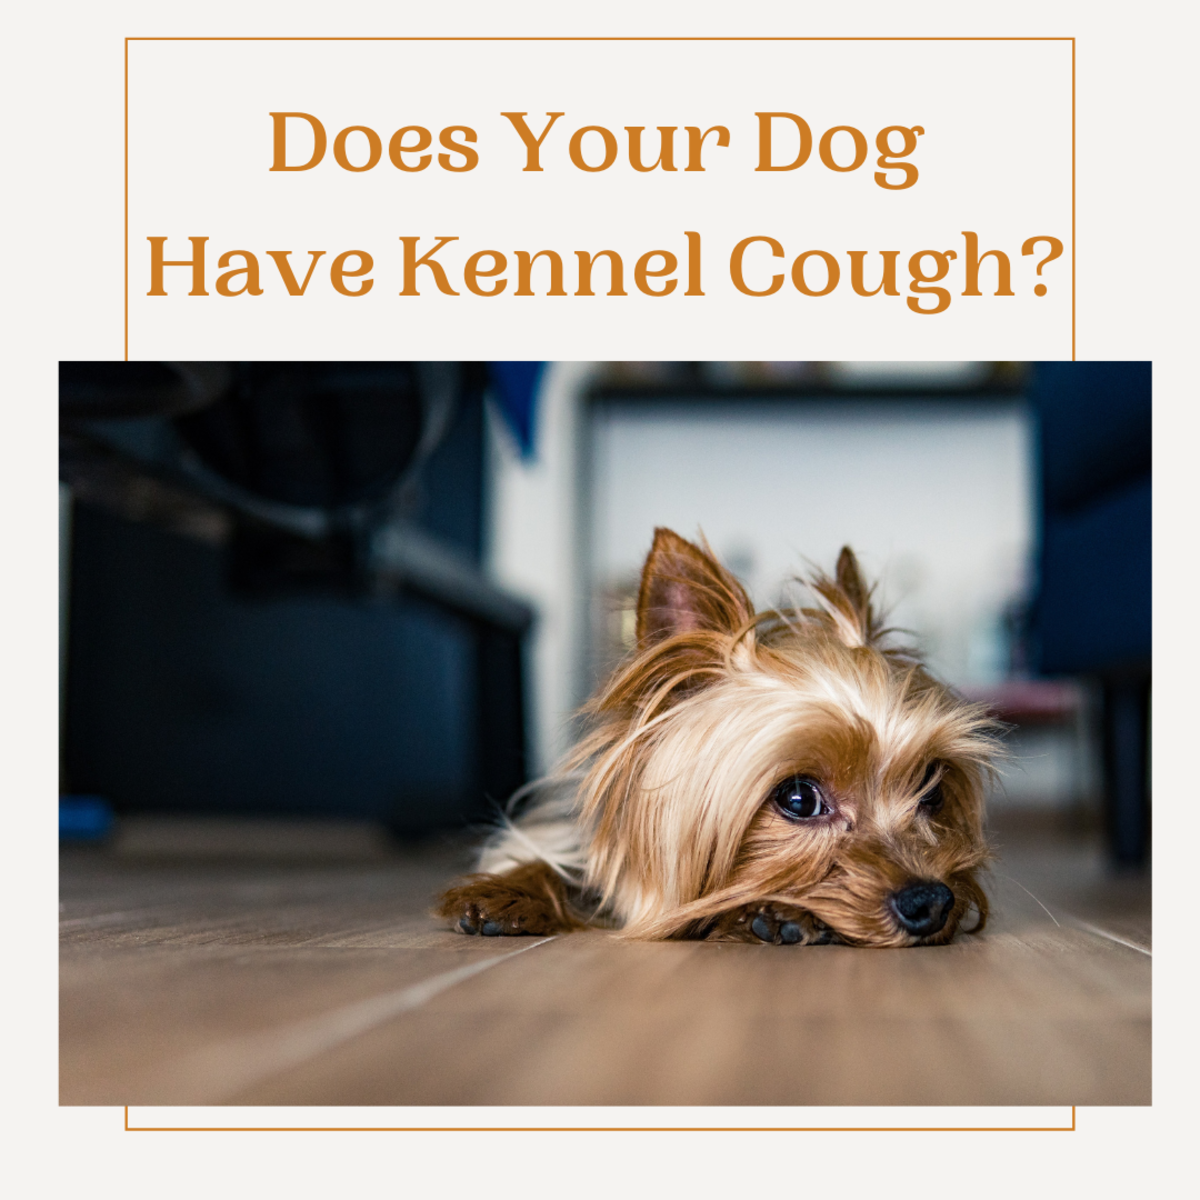 Kennel cough is a common illness in dogs. Learn how to spot the signs, what you can do at home to help your pet stay comfortable, and when it's time to see a vet.